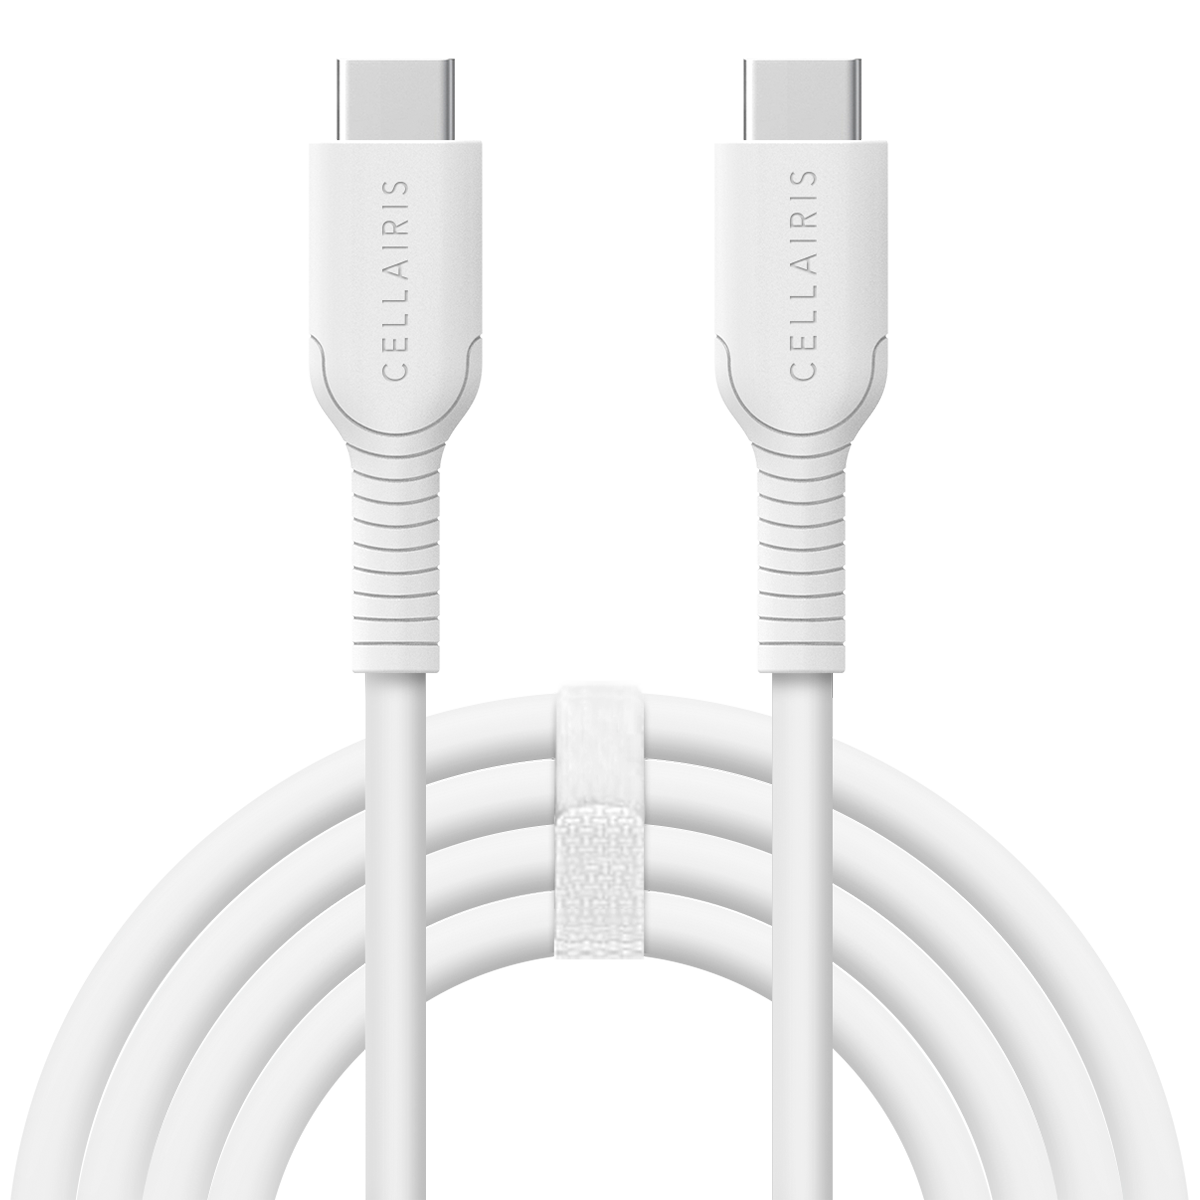 Charge Cable - 10FT USB-C to USB-C White Cables